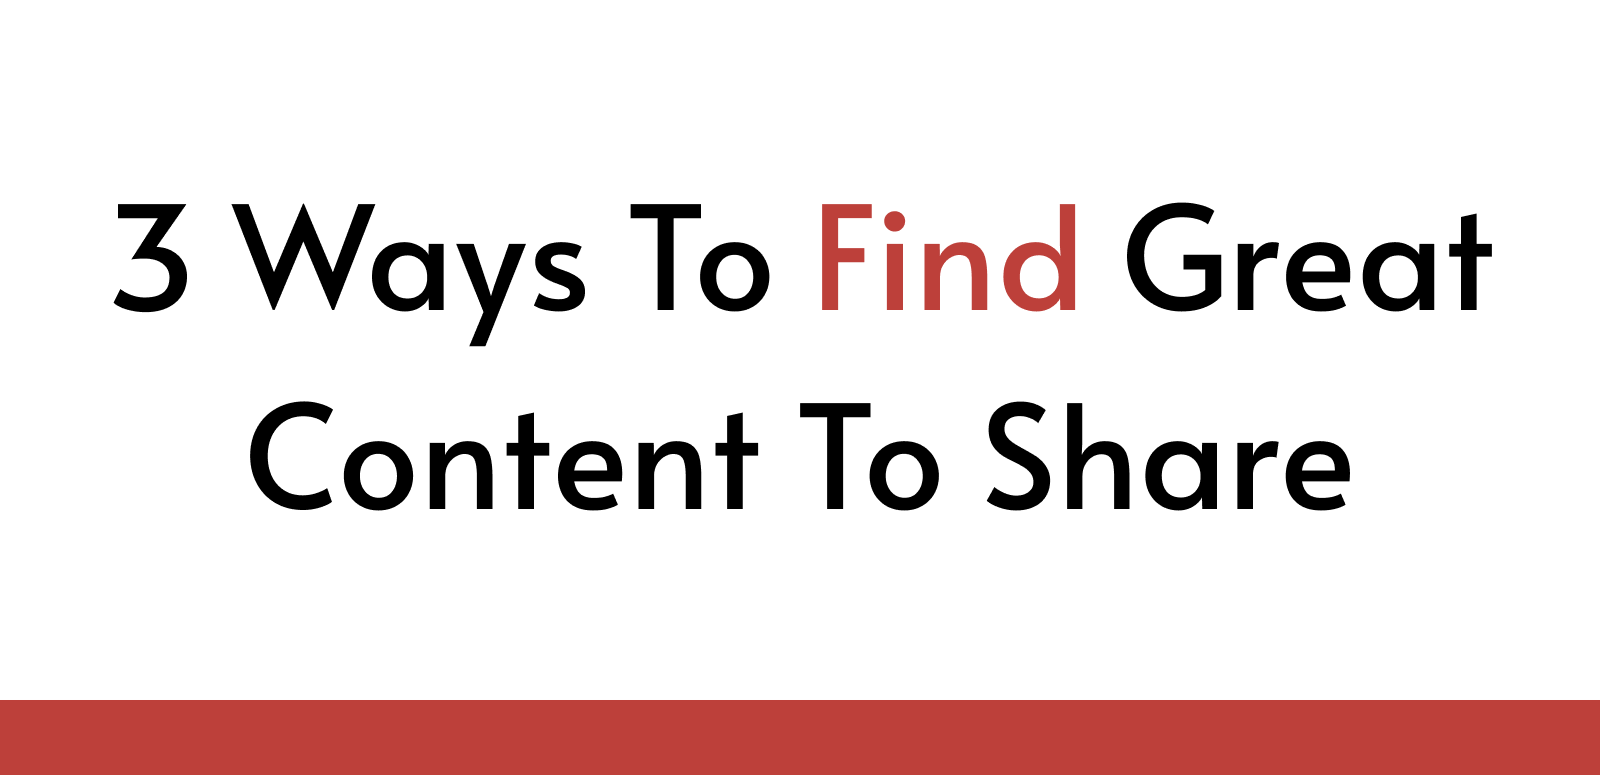 3 Ways To Find Great Content To Share